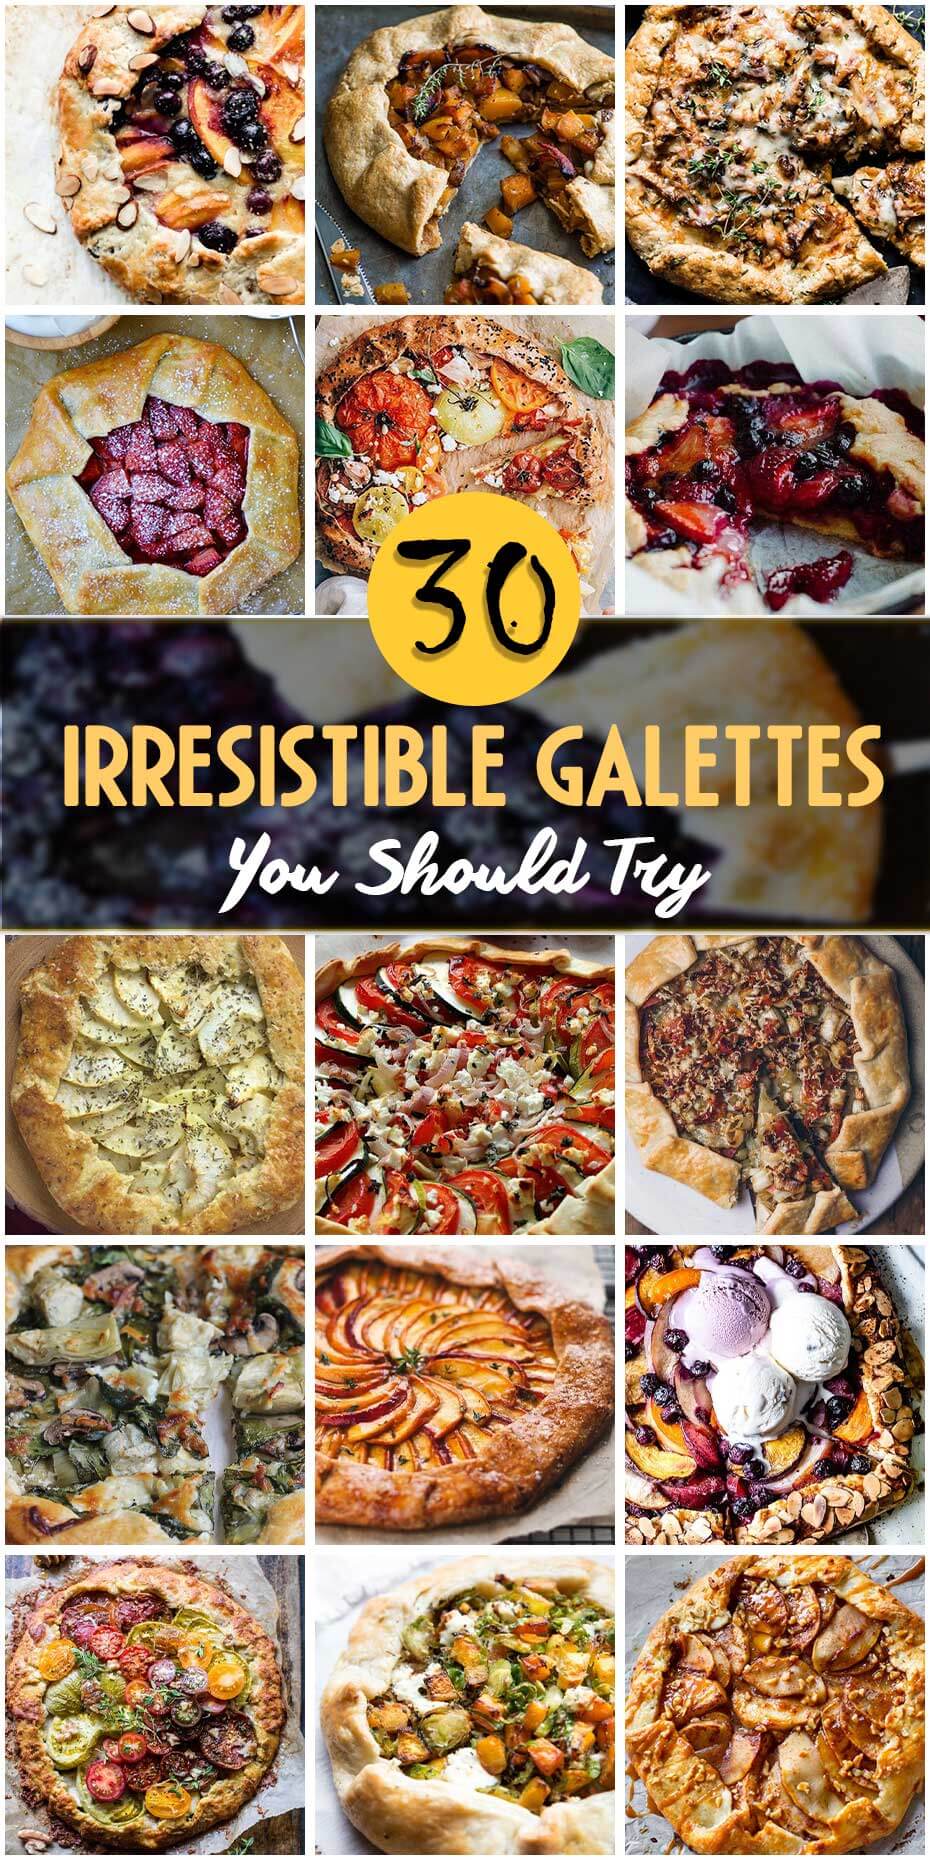 30 “Irresistible” Recipes For Galette